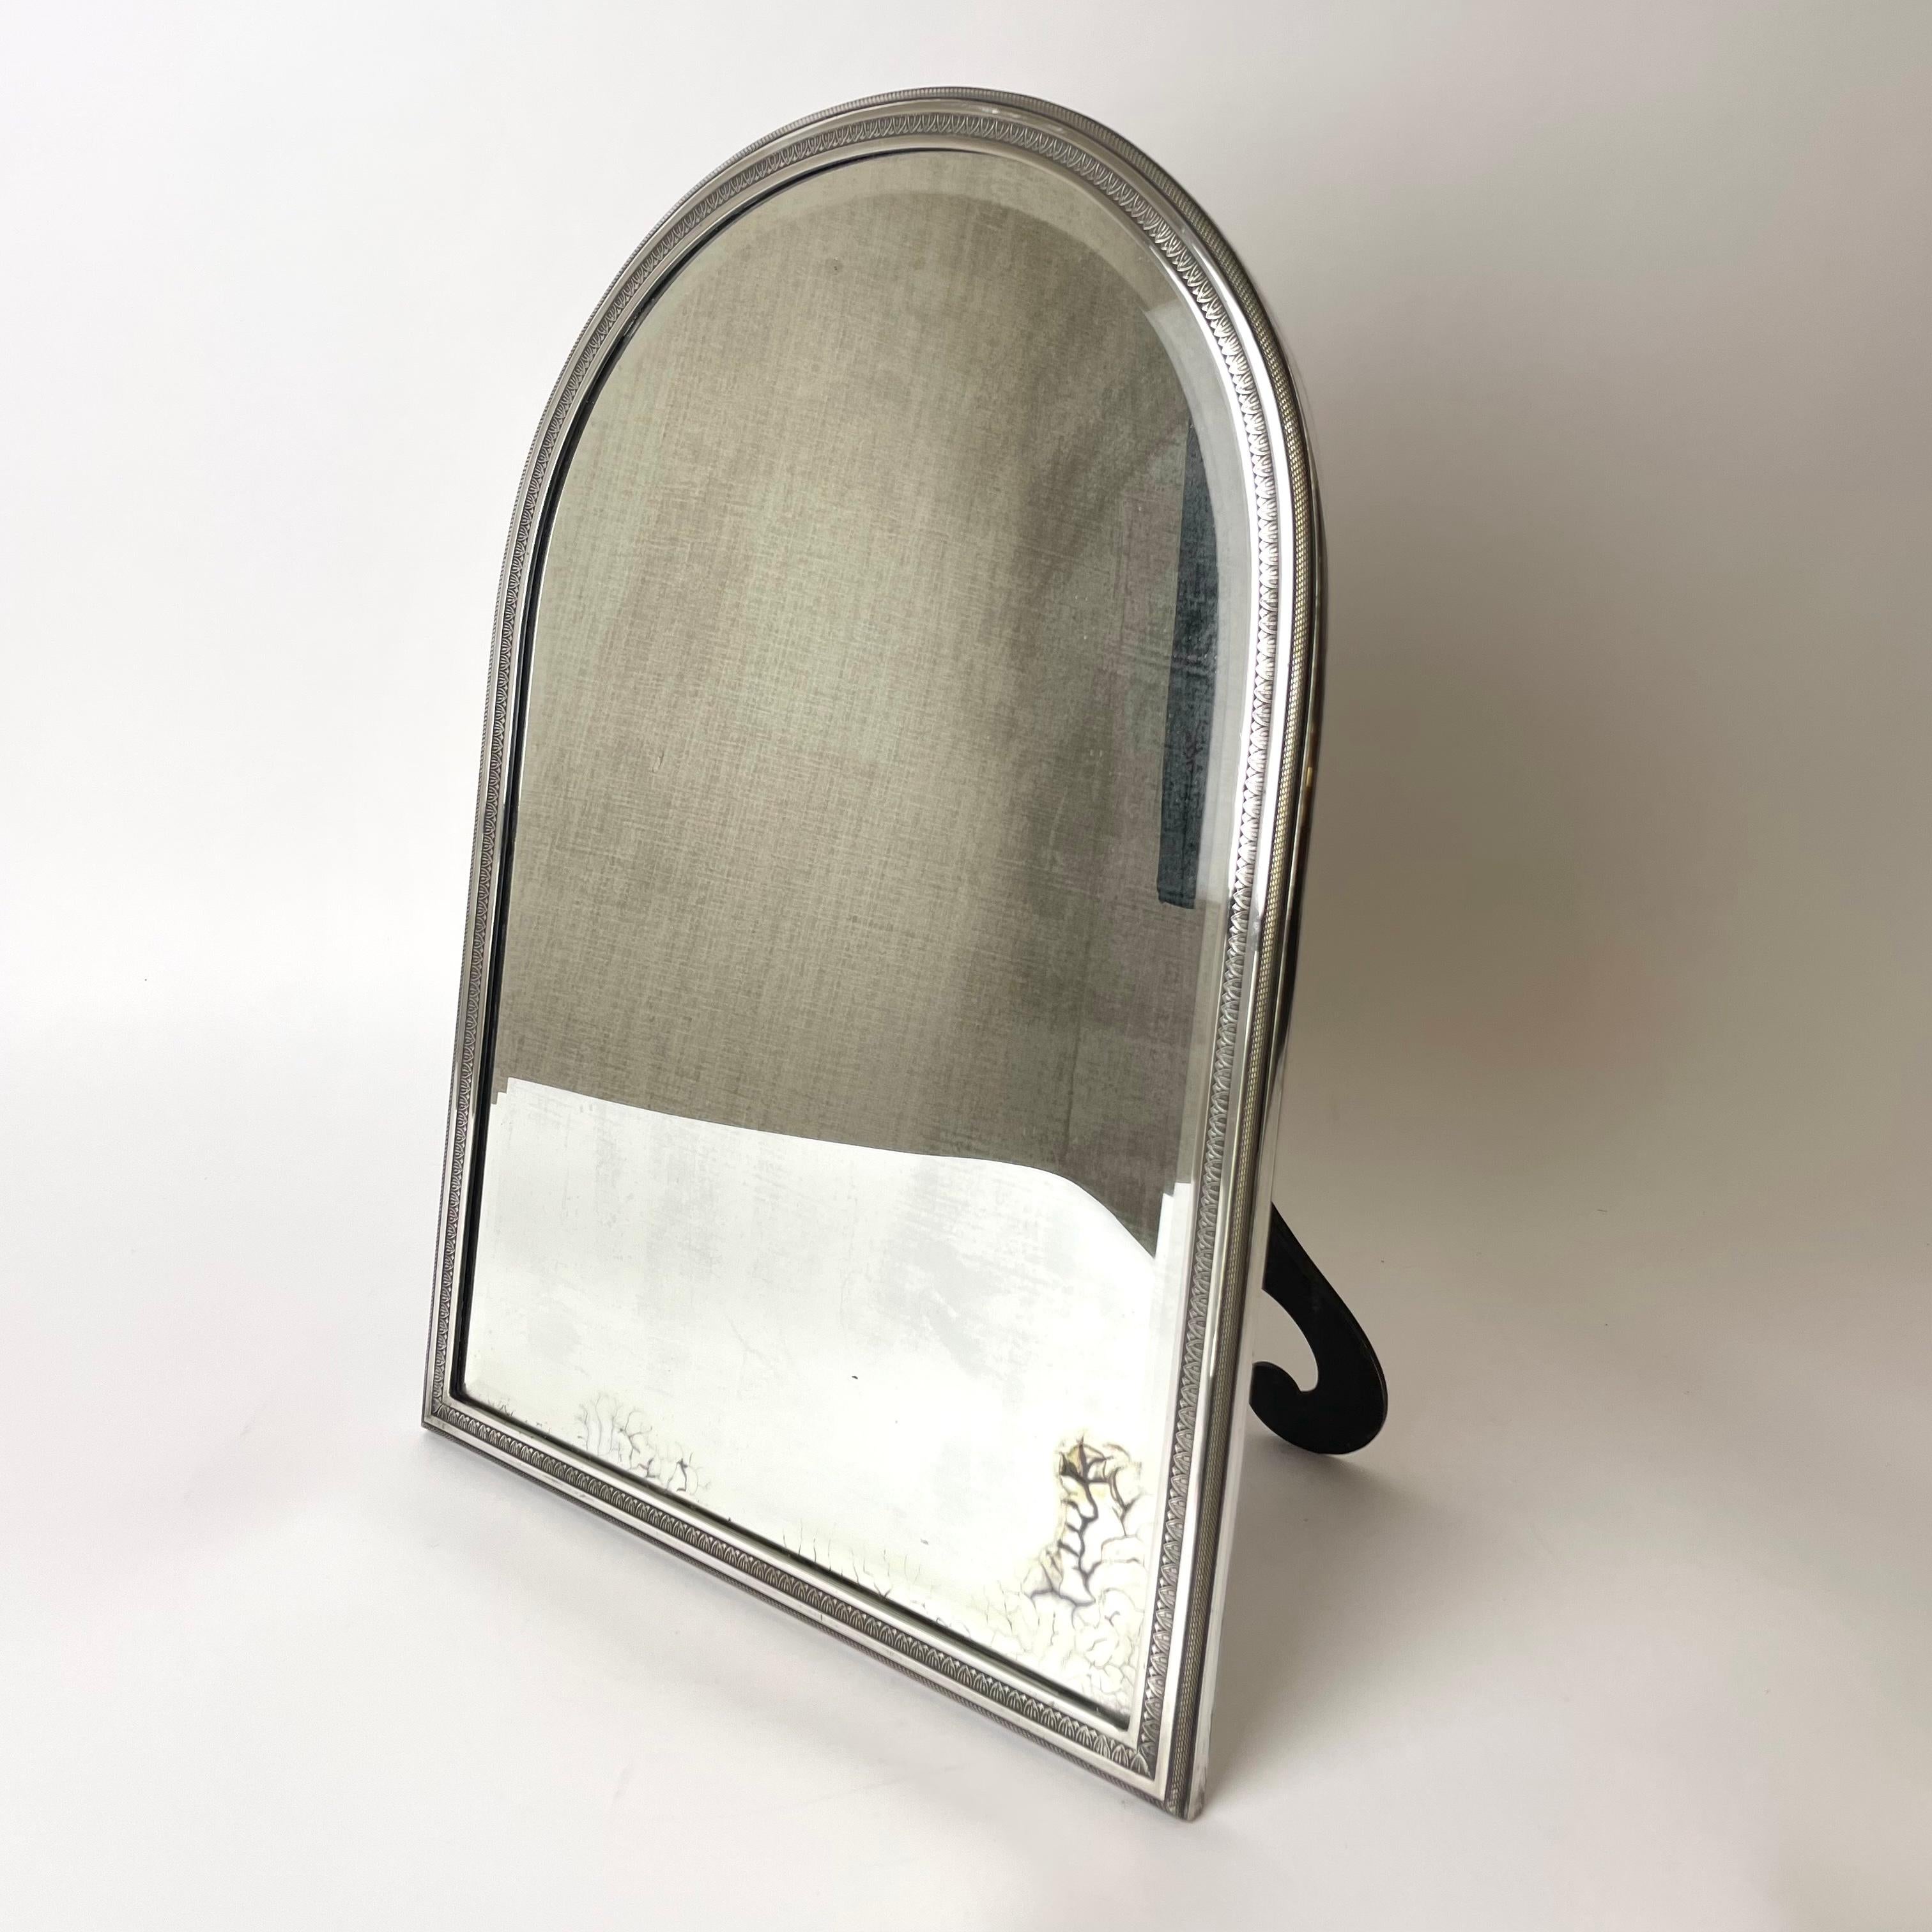 Elegant table/wall Mirror in plated silver. The mirror can be used both as a table mirror and for a wall ( see photos ). Beautifully decorated in Empire style and made in France during the late 19th Century. The mirror glass is original with a